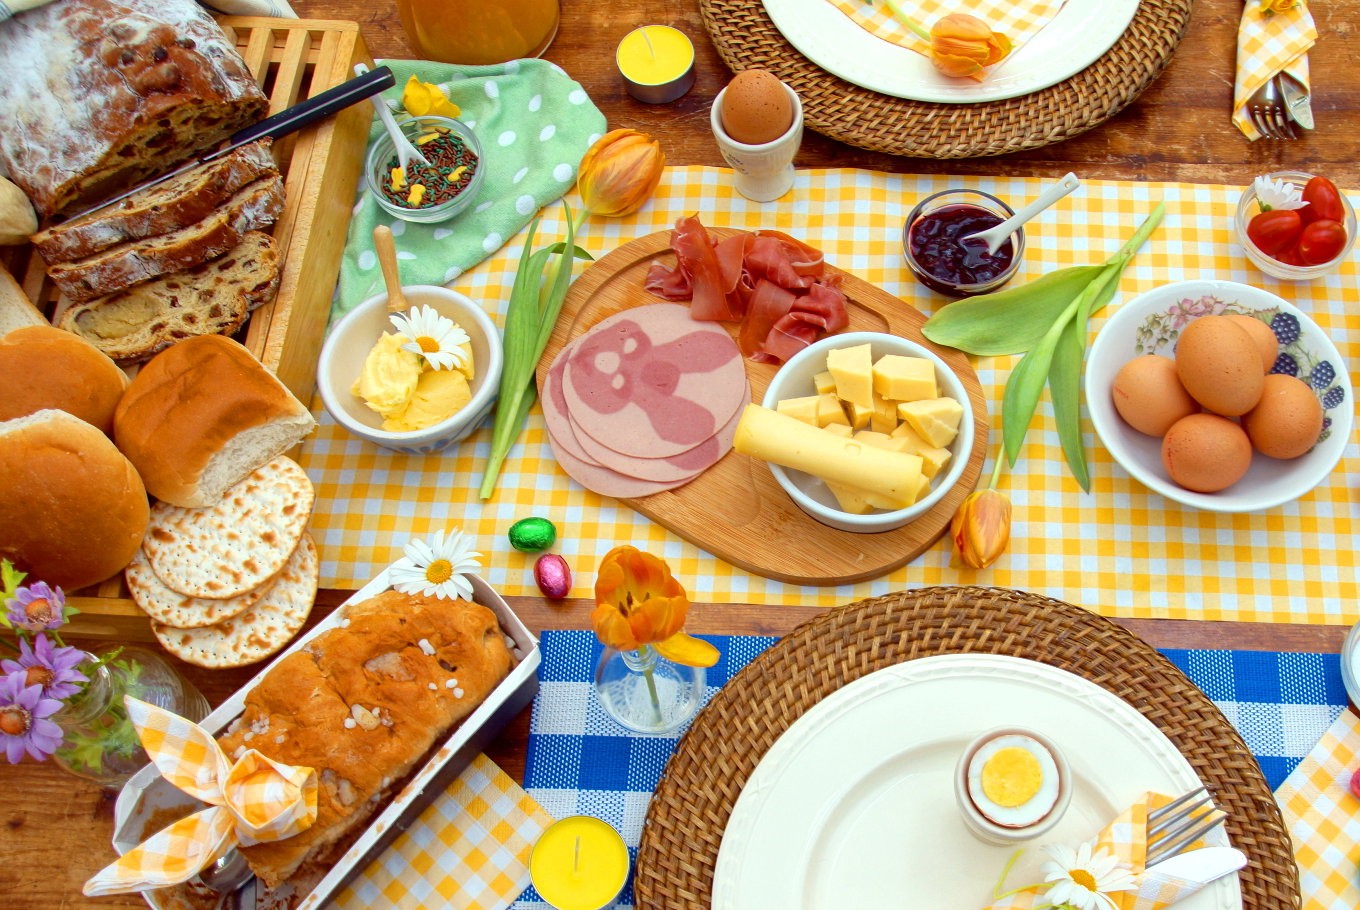 The hotel breakfast buffet dilemma: Here are the rules to follow